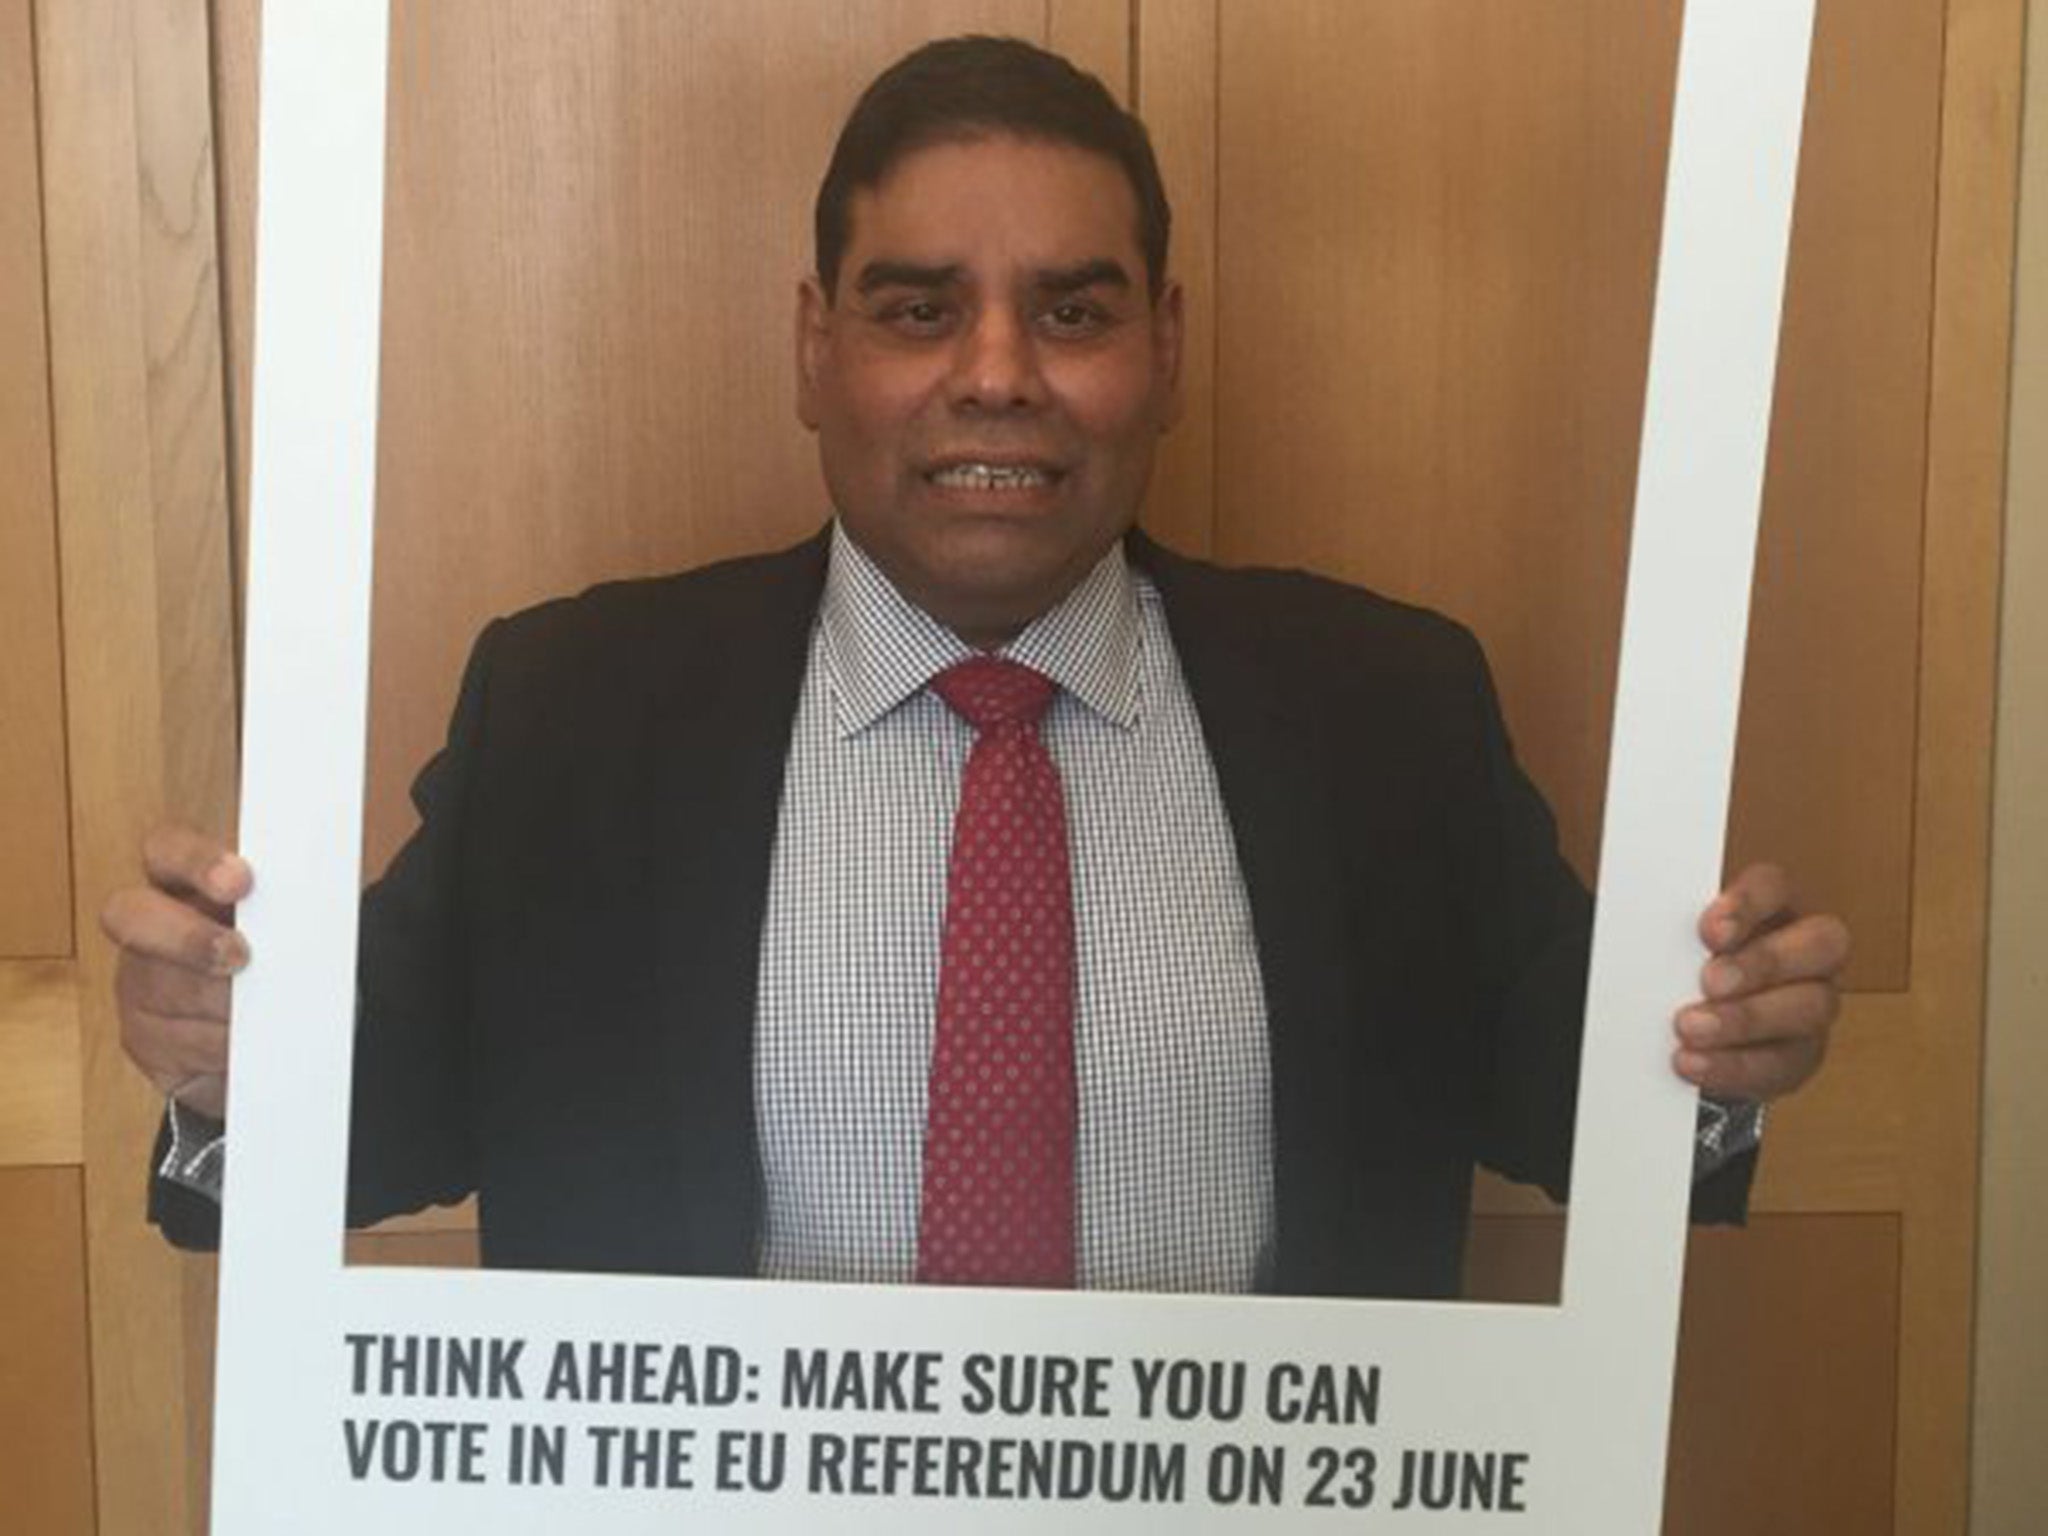 Khalid Mahmood says he is 'disappointed' by Boris Johnson's comments about Barack Obama's father being from Kenya and expressed concerns about Nigel Farage’s remarks about migrants coming to the UK